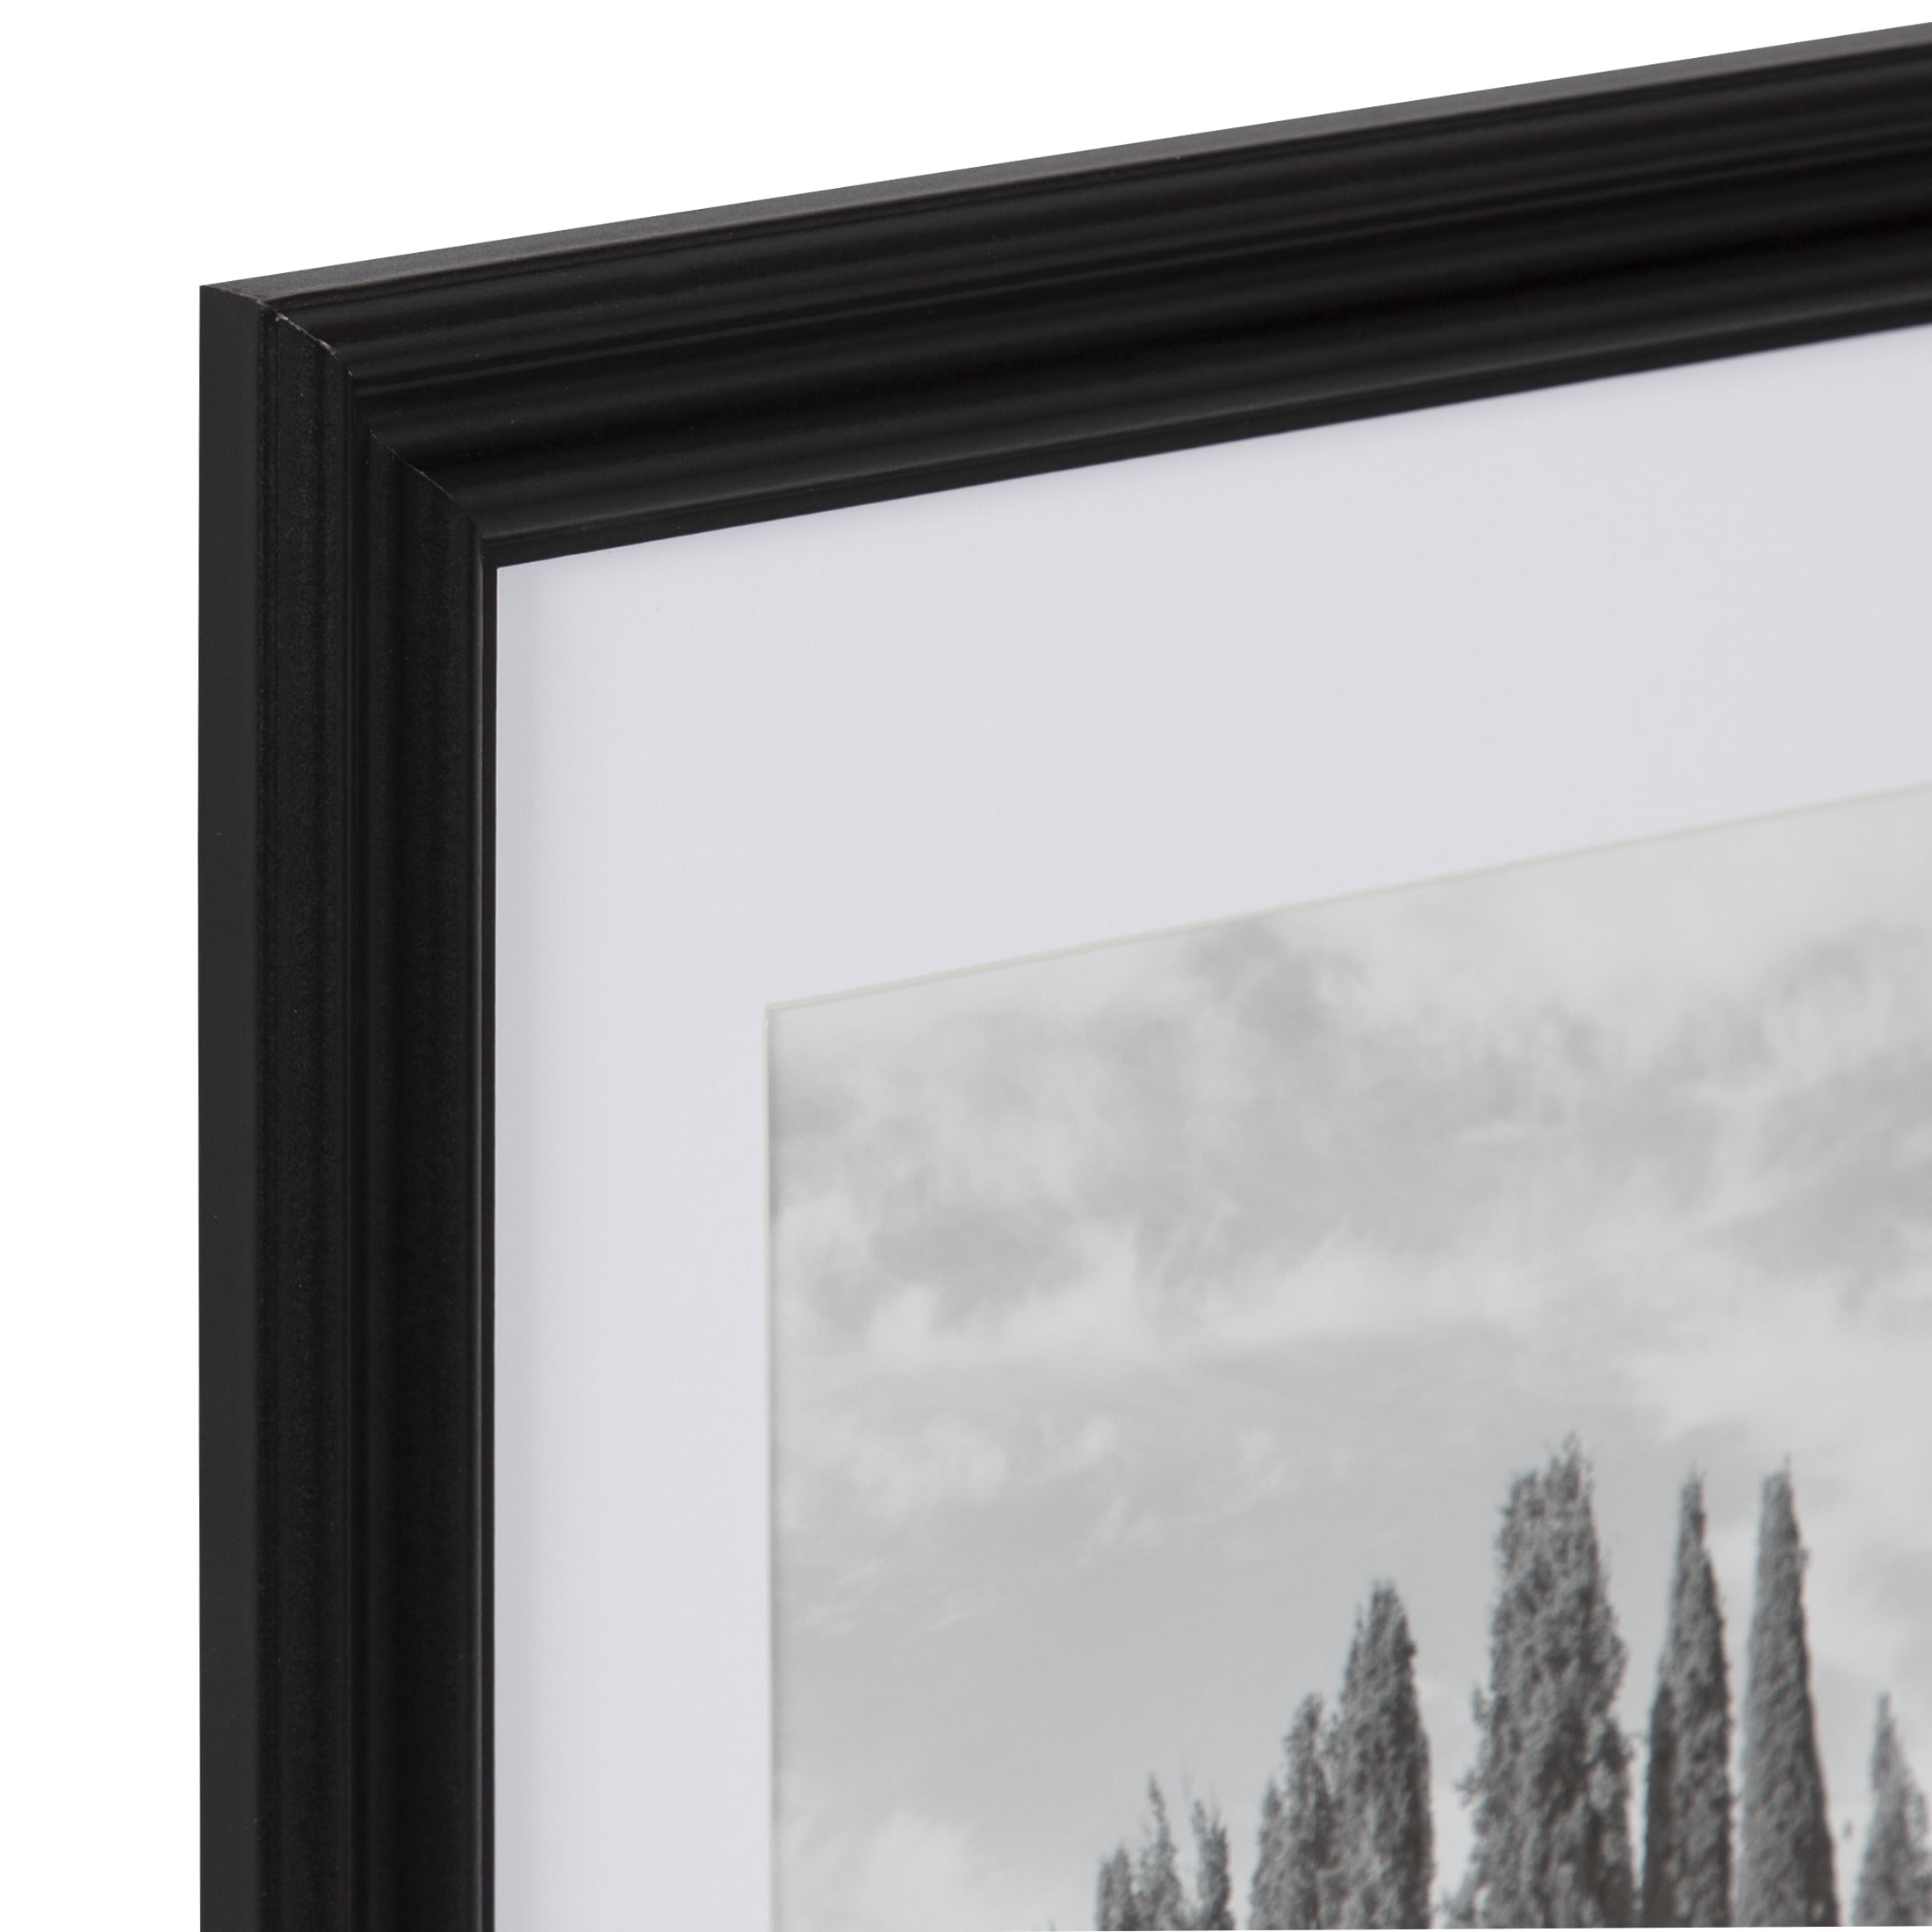 Mainstays 11X14 Matted to 8X10 Front Loading Picture Frame, Black, Set of 3